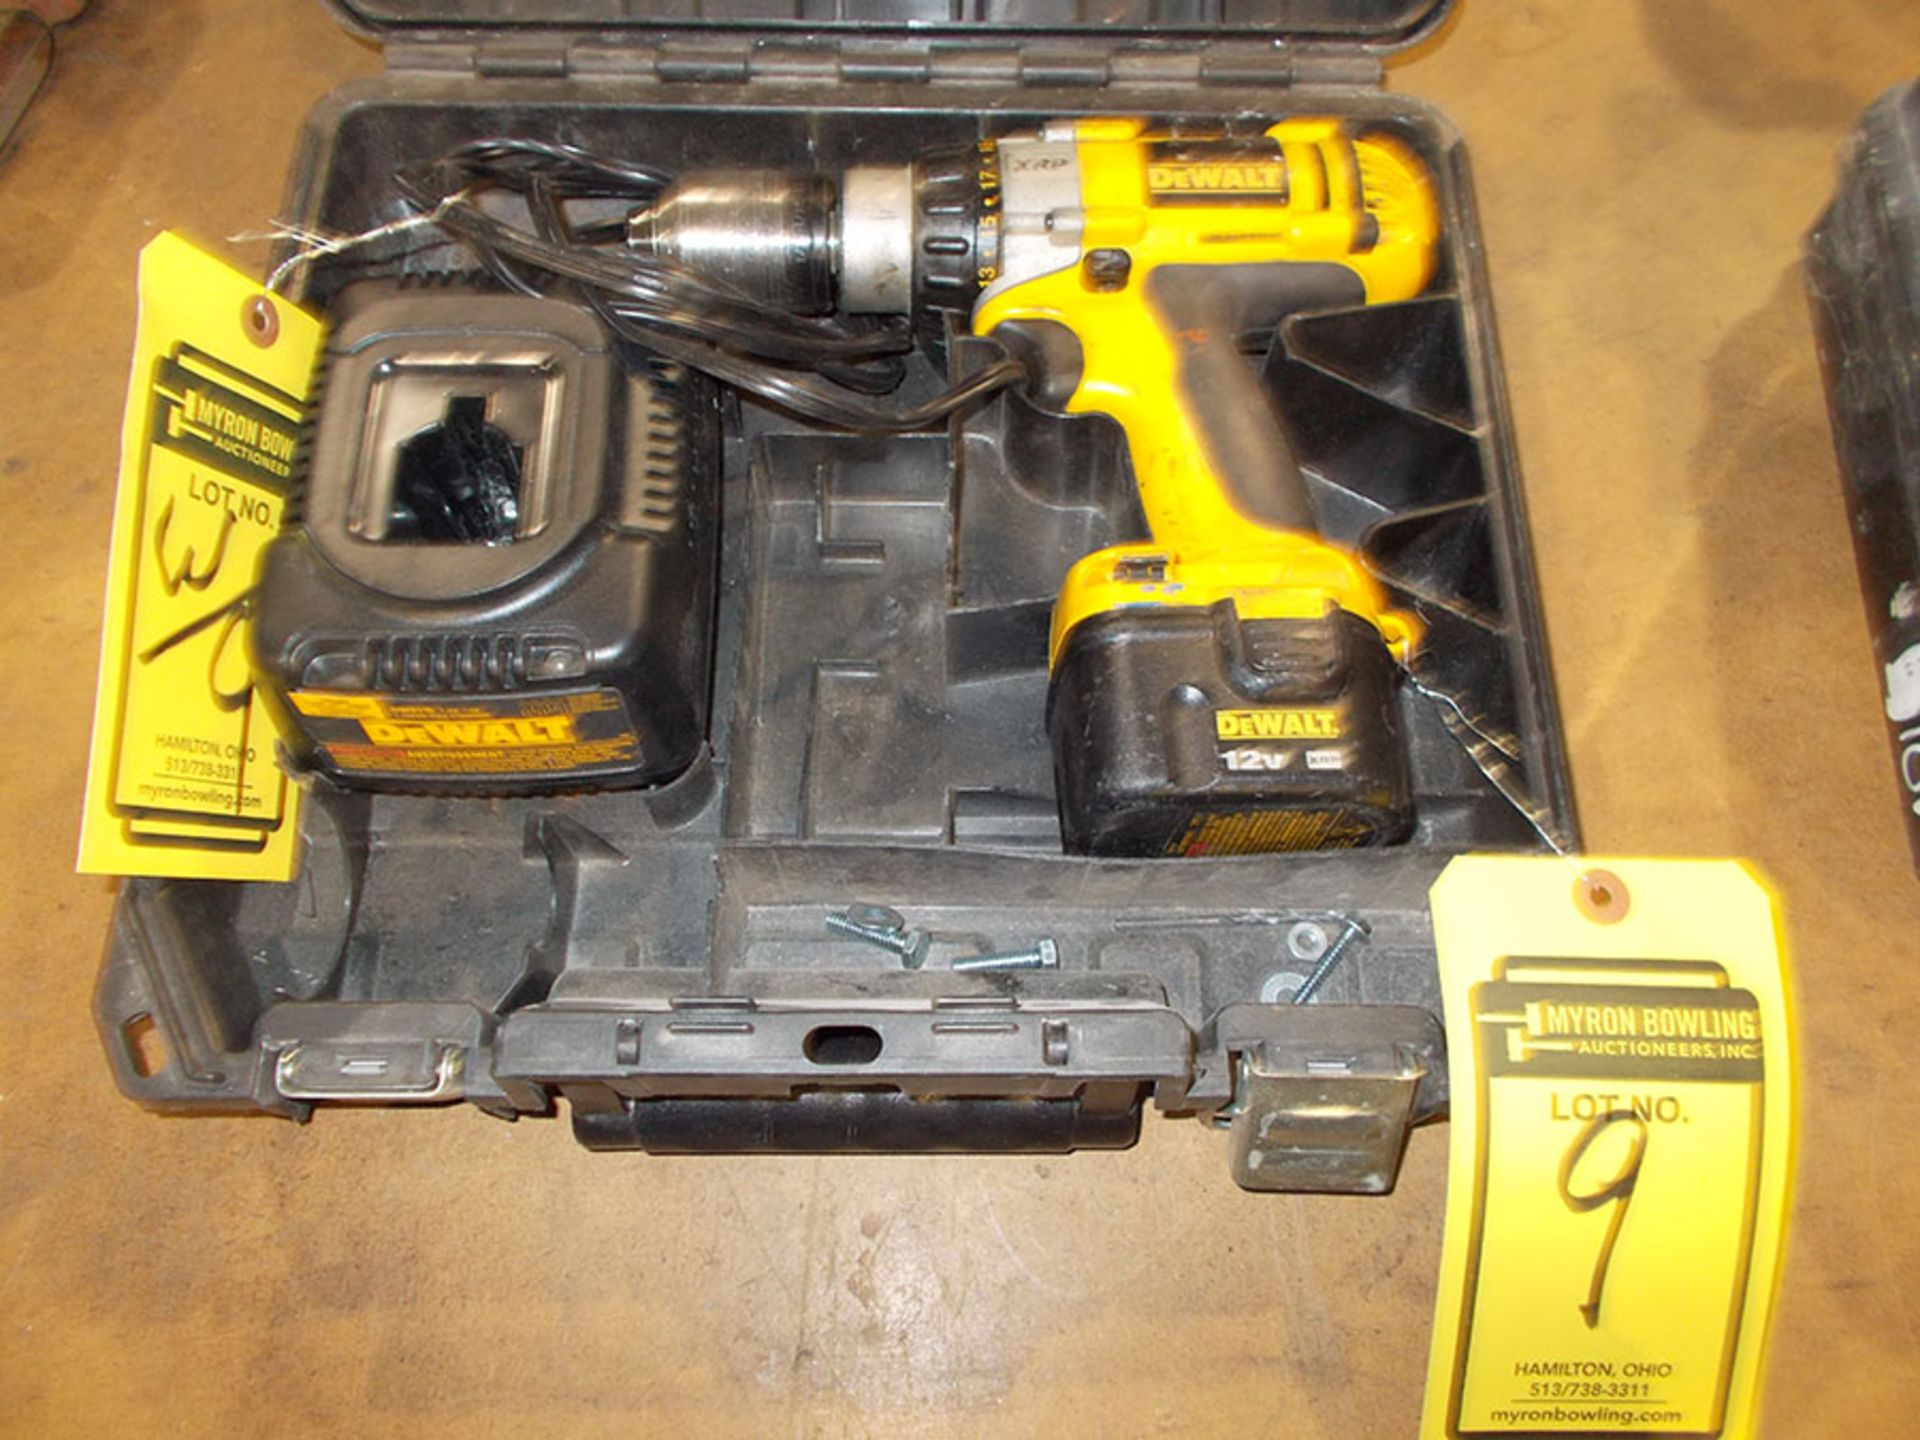 DEWALT 12 VOLT BATTERY DRILL WITH SPEED CHUCK & CHARGER